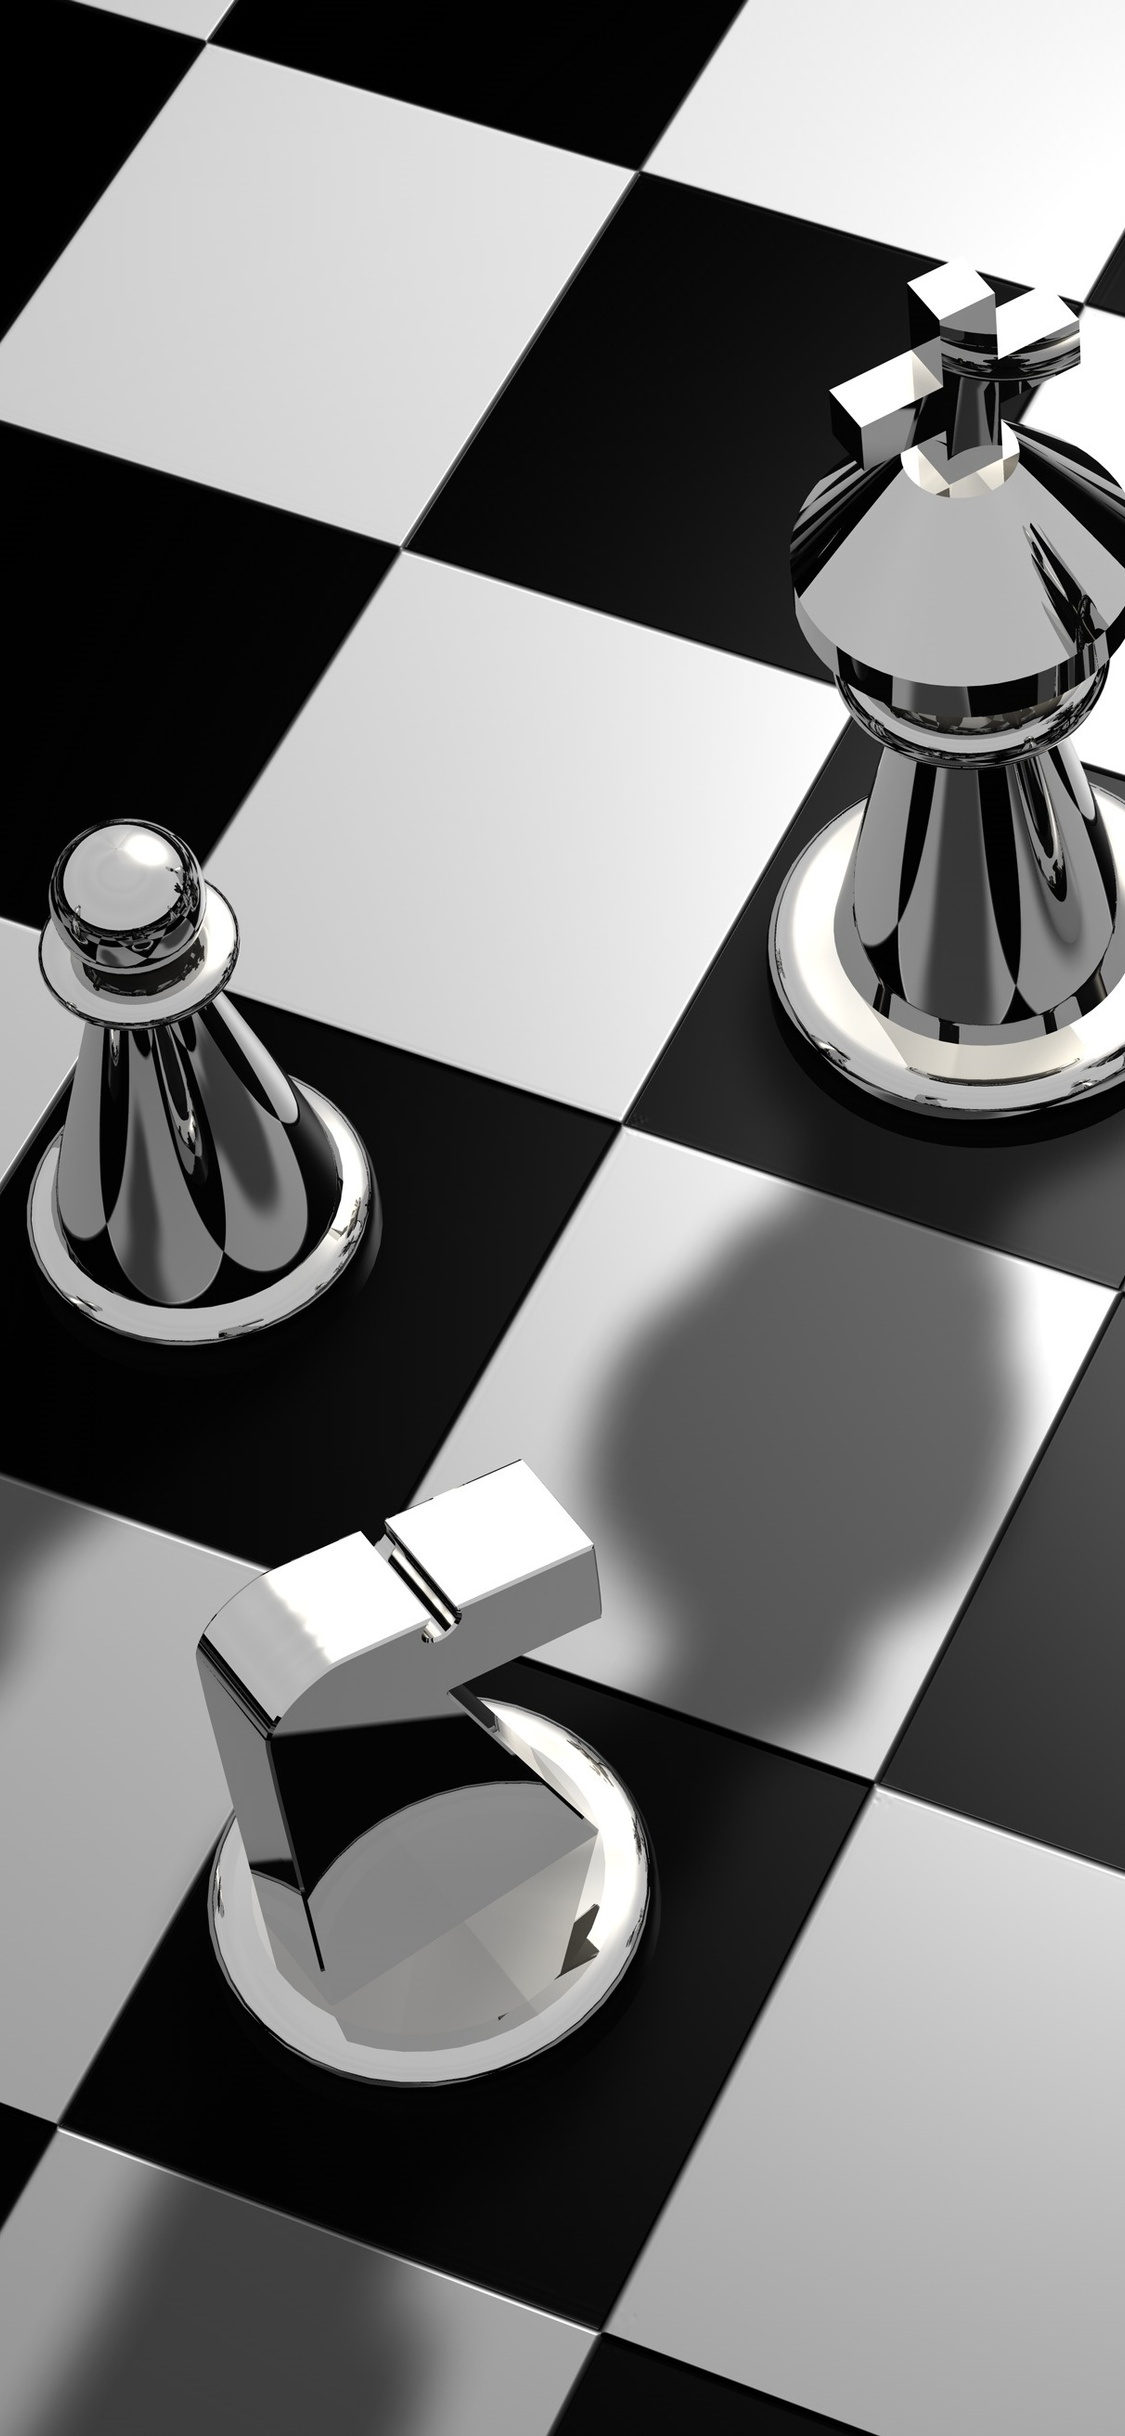 Chess Game iPhone Wallpaper HD  iPhone Wallpapers  iPhone Wallpapers